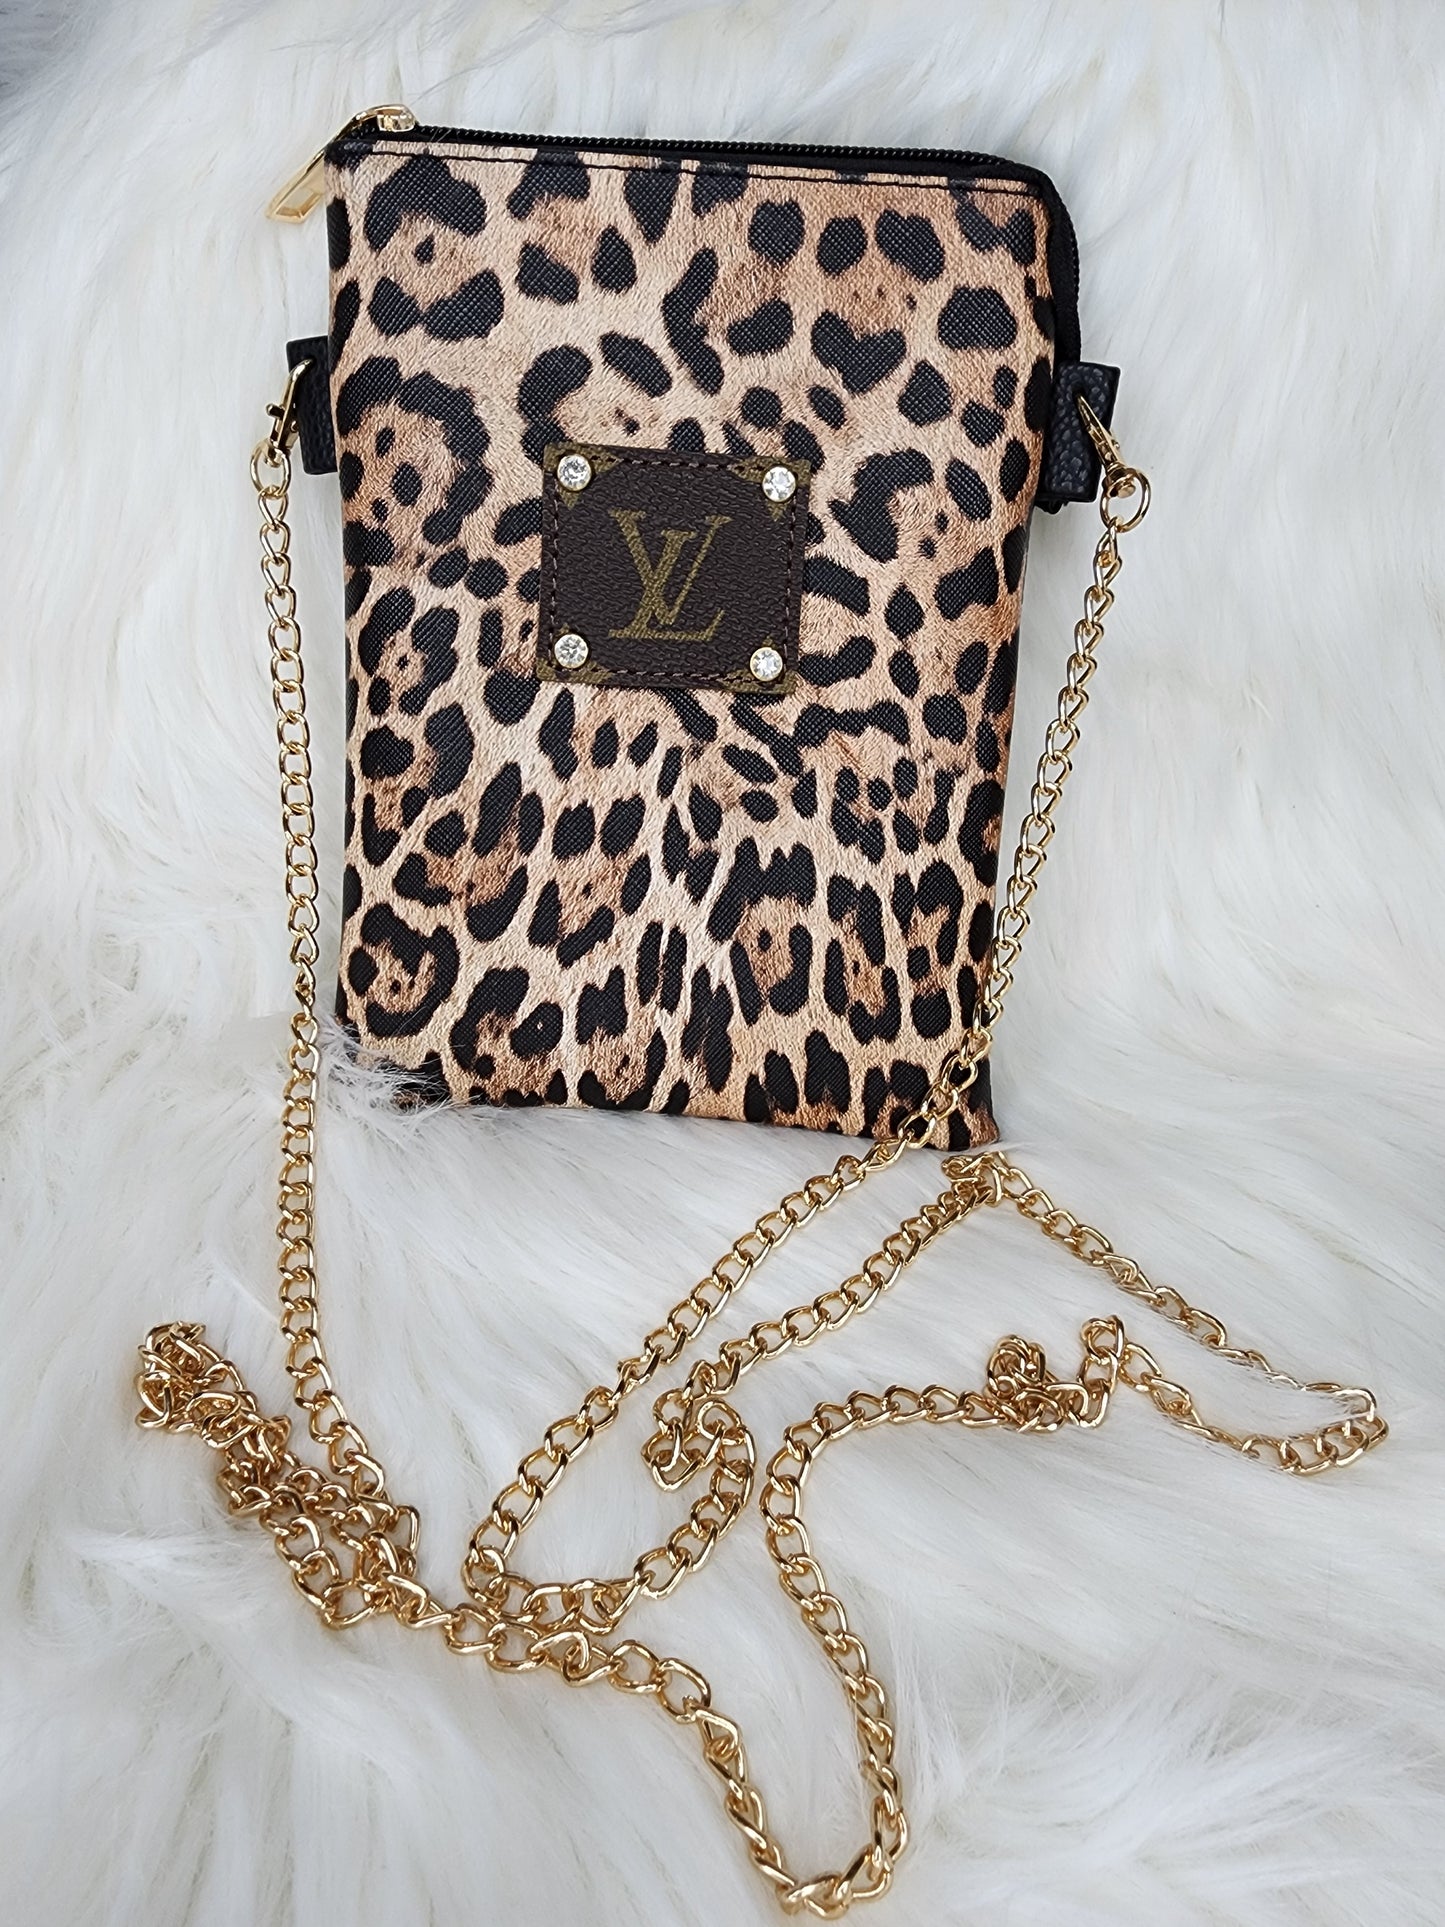 Repurposed LV Leopard pocket bag purse  Ivy and Pearl Boutique   